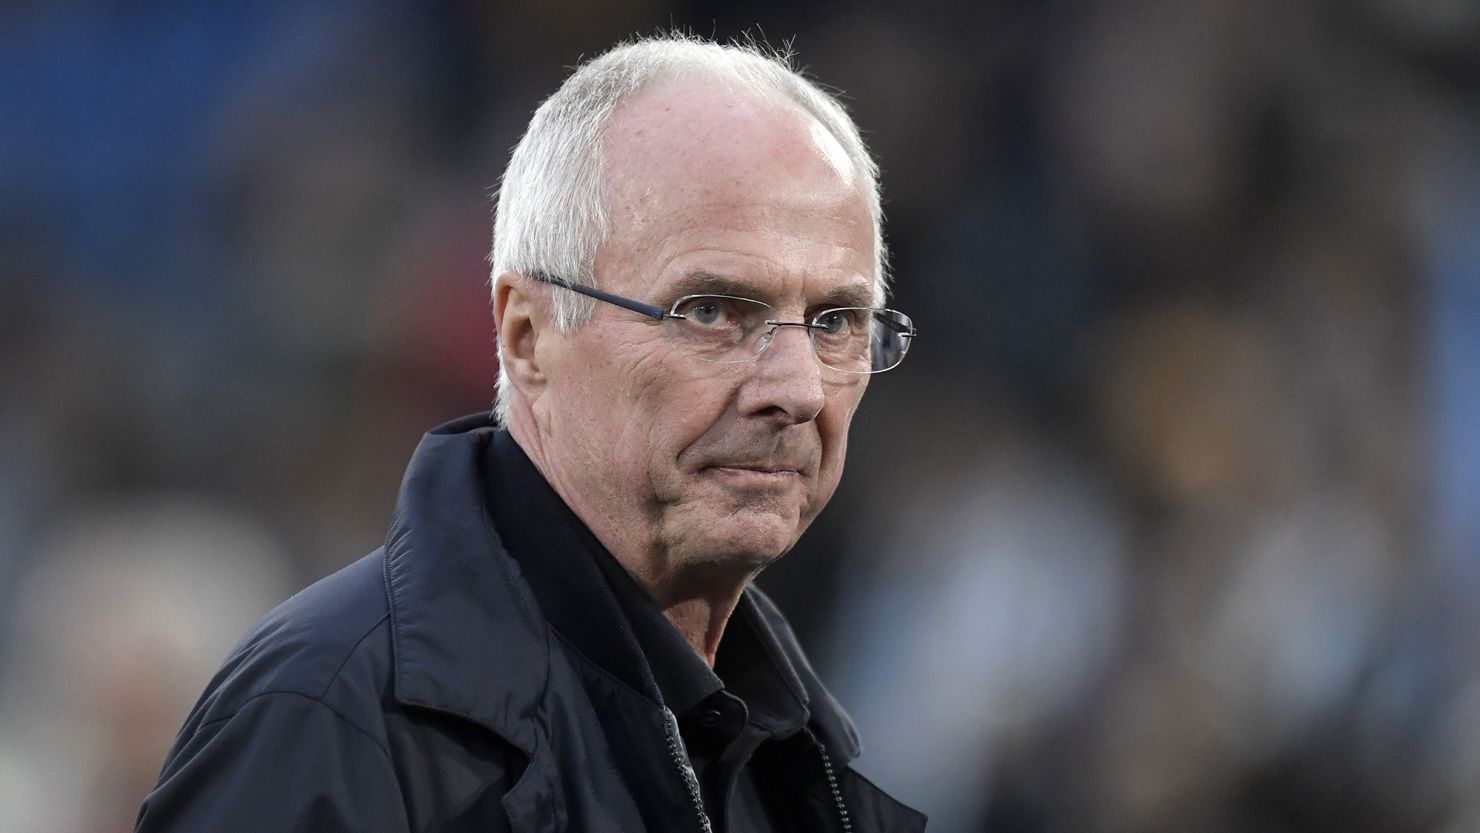 Sven-Göran Eriksson had a managerial career of more than 40 years.